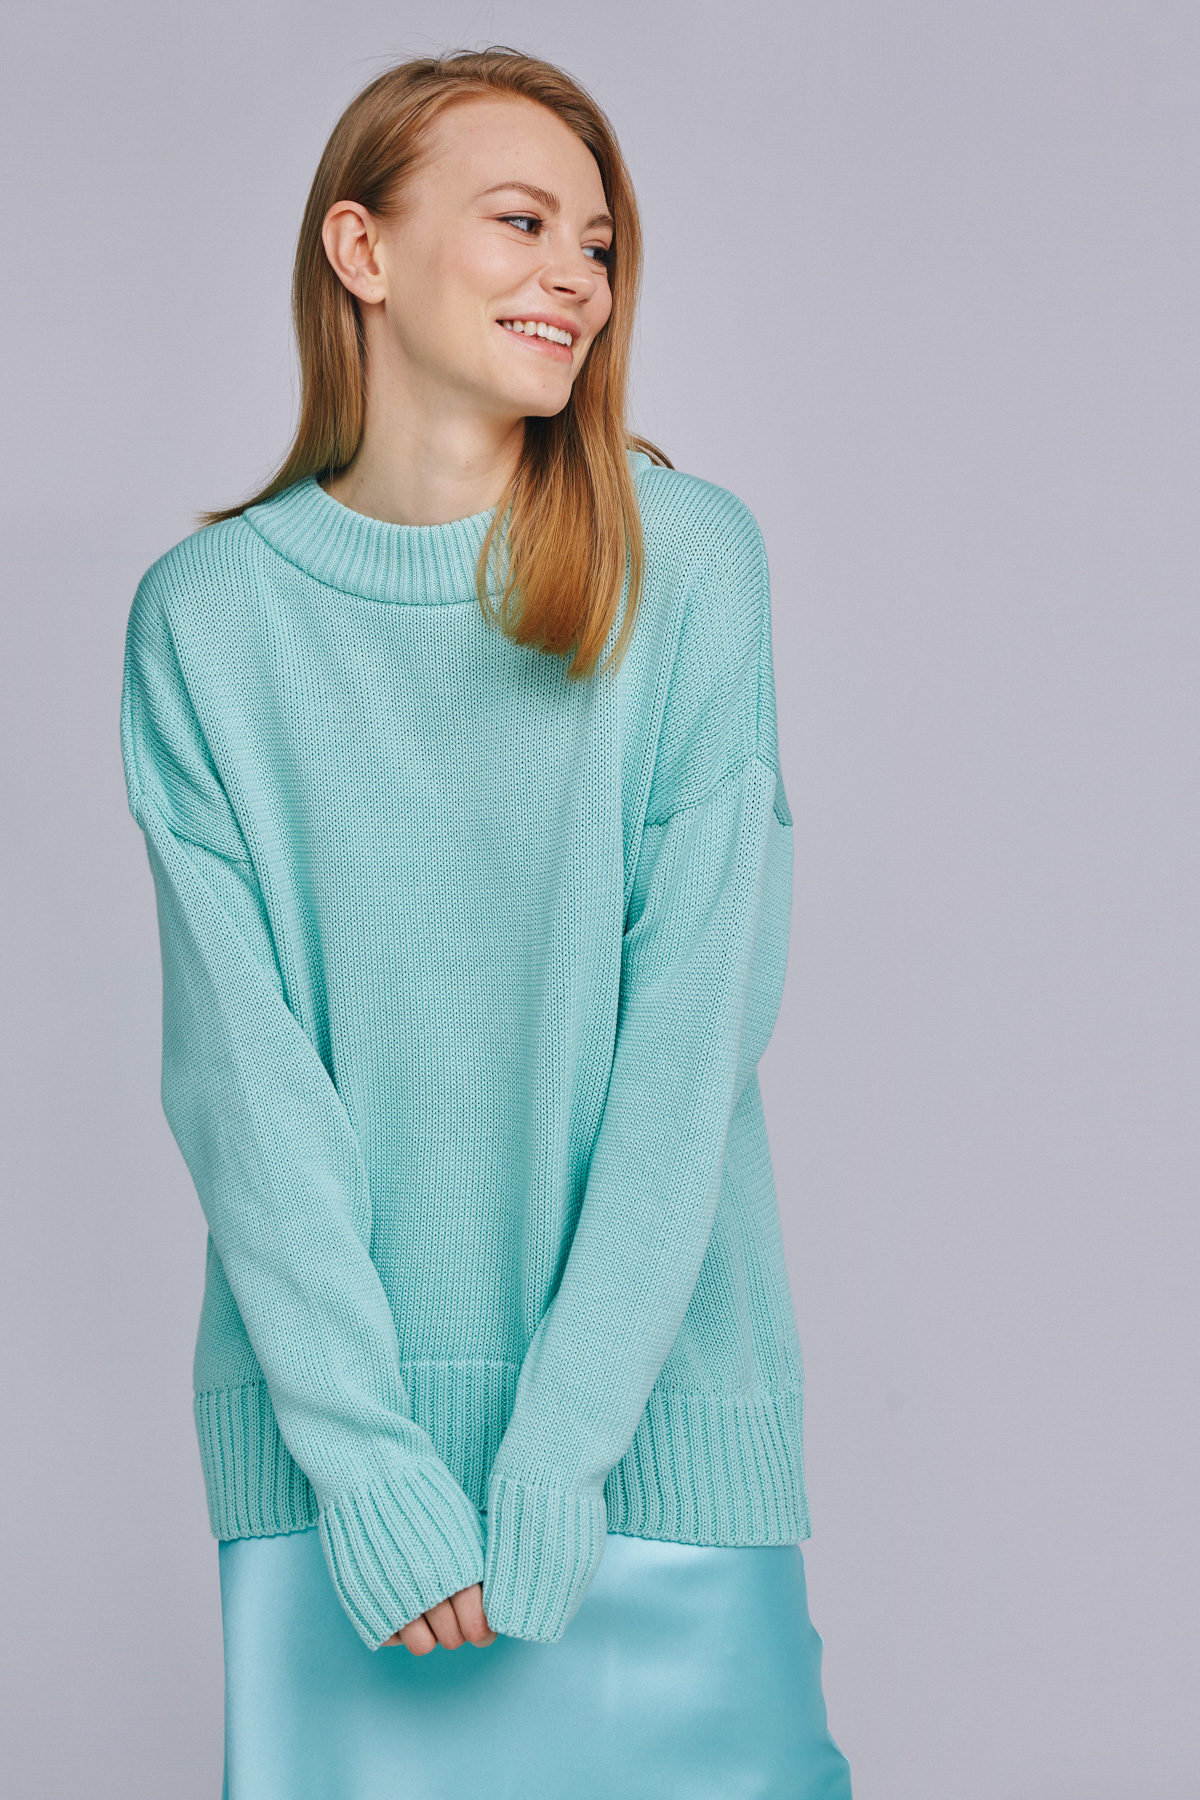 Mint knitted cotton sweater, photo 2